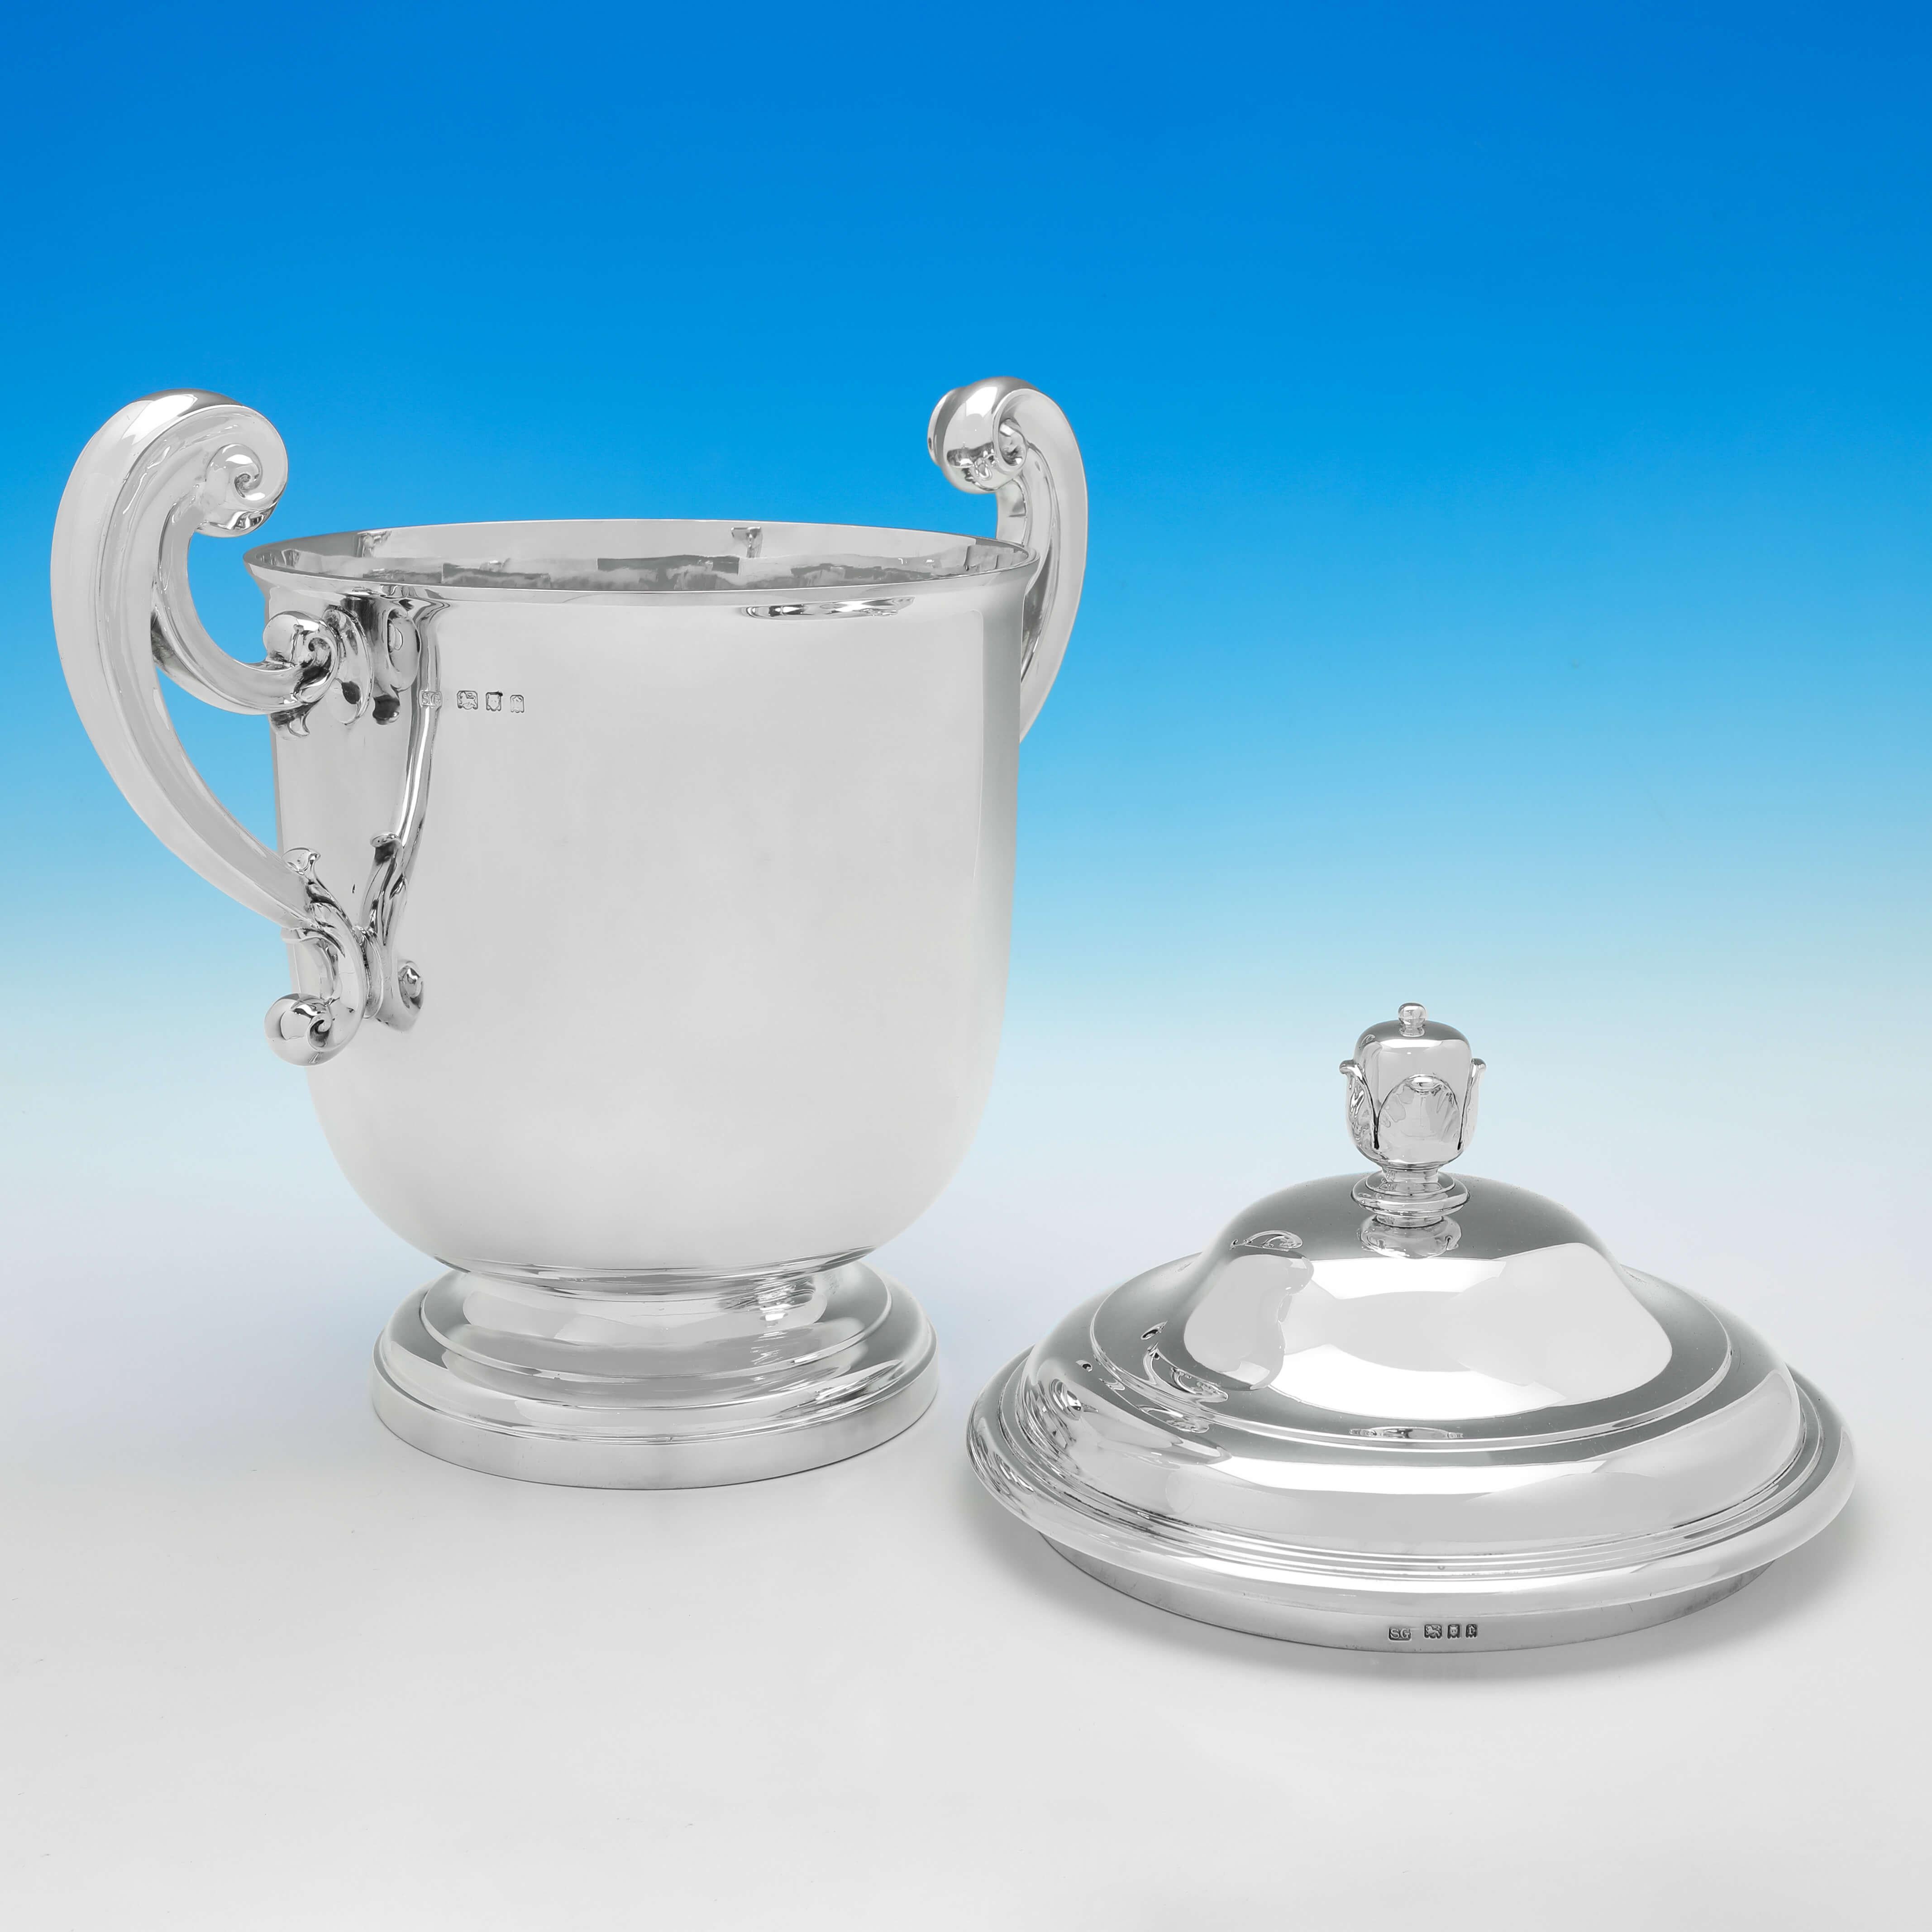 Hallmarked in London in 1920 by Garrard & Co., this very large and very handsome, Antique Sterling Silver Trophy, is of traditional form, with scroll handles, and a removable lid. 

The trophy measures 17.25